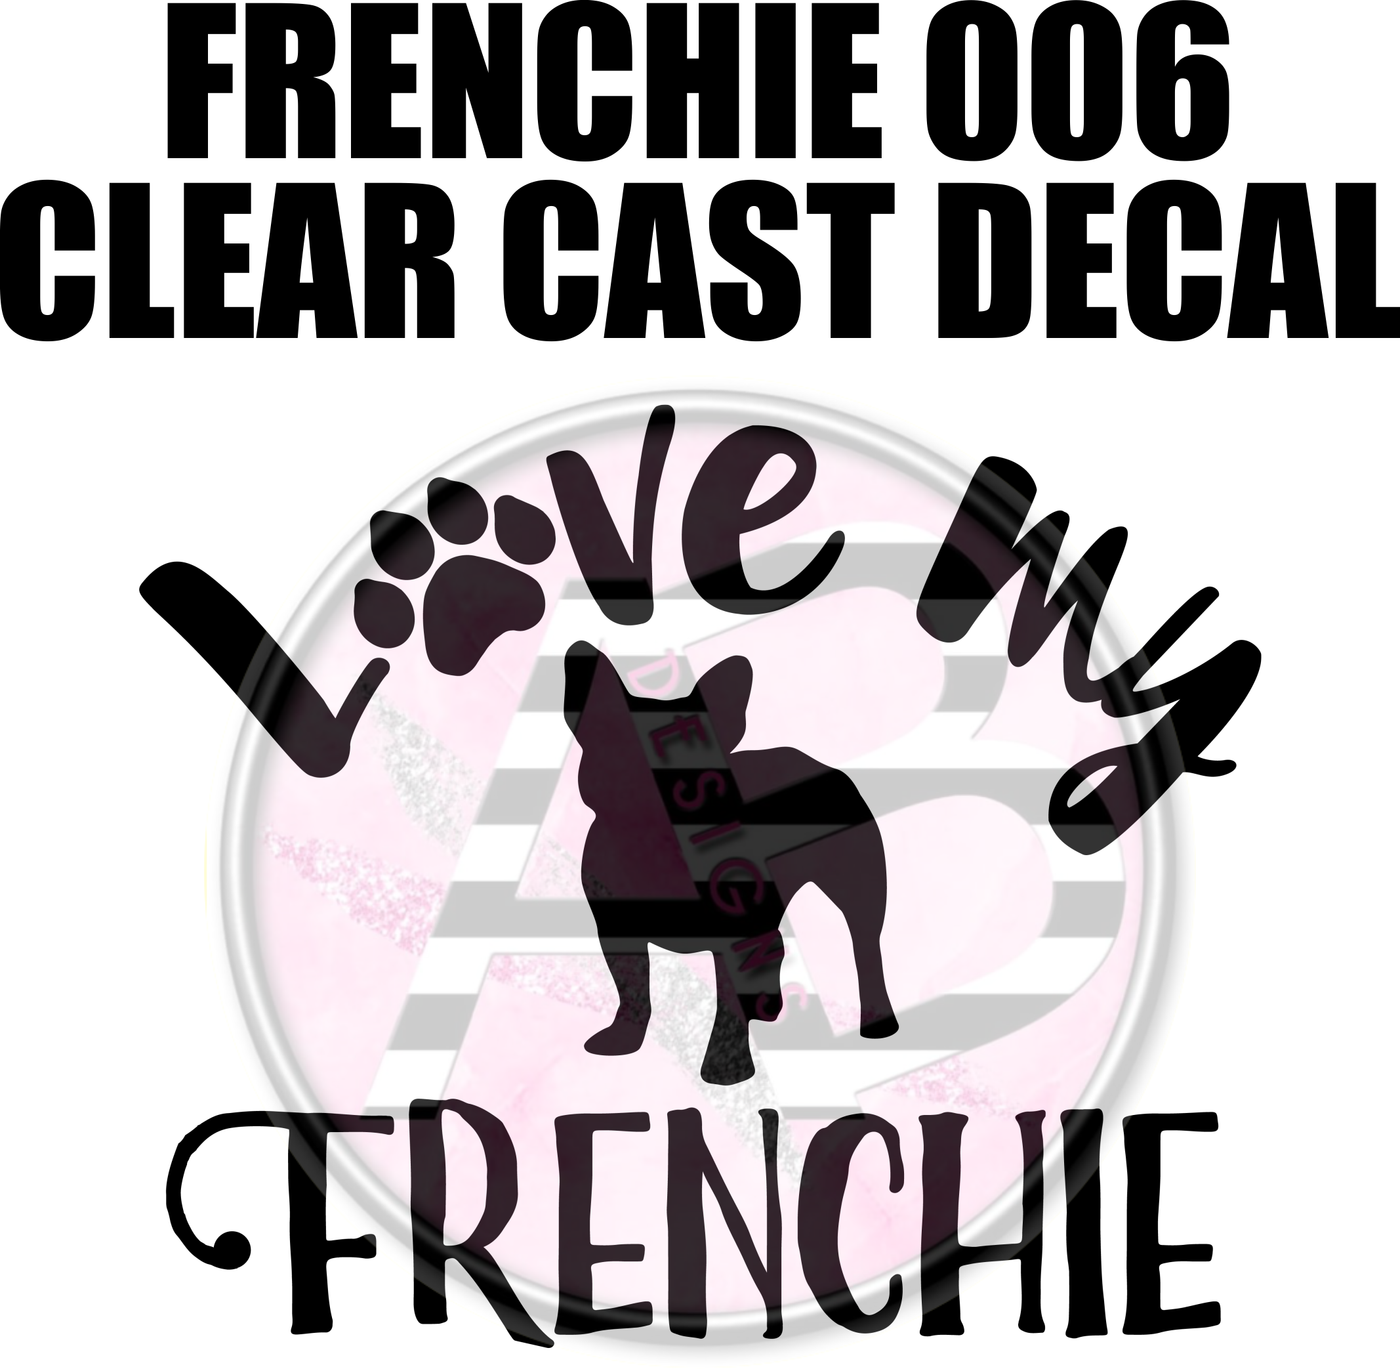 Frenchie 006 - Clear Cast Decal